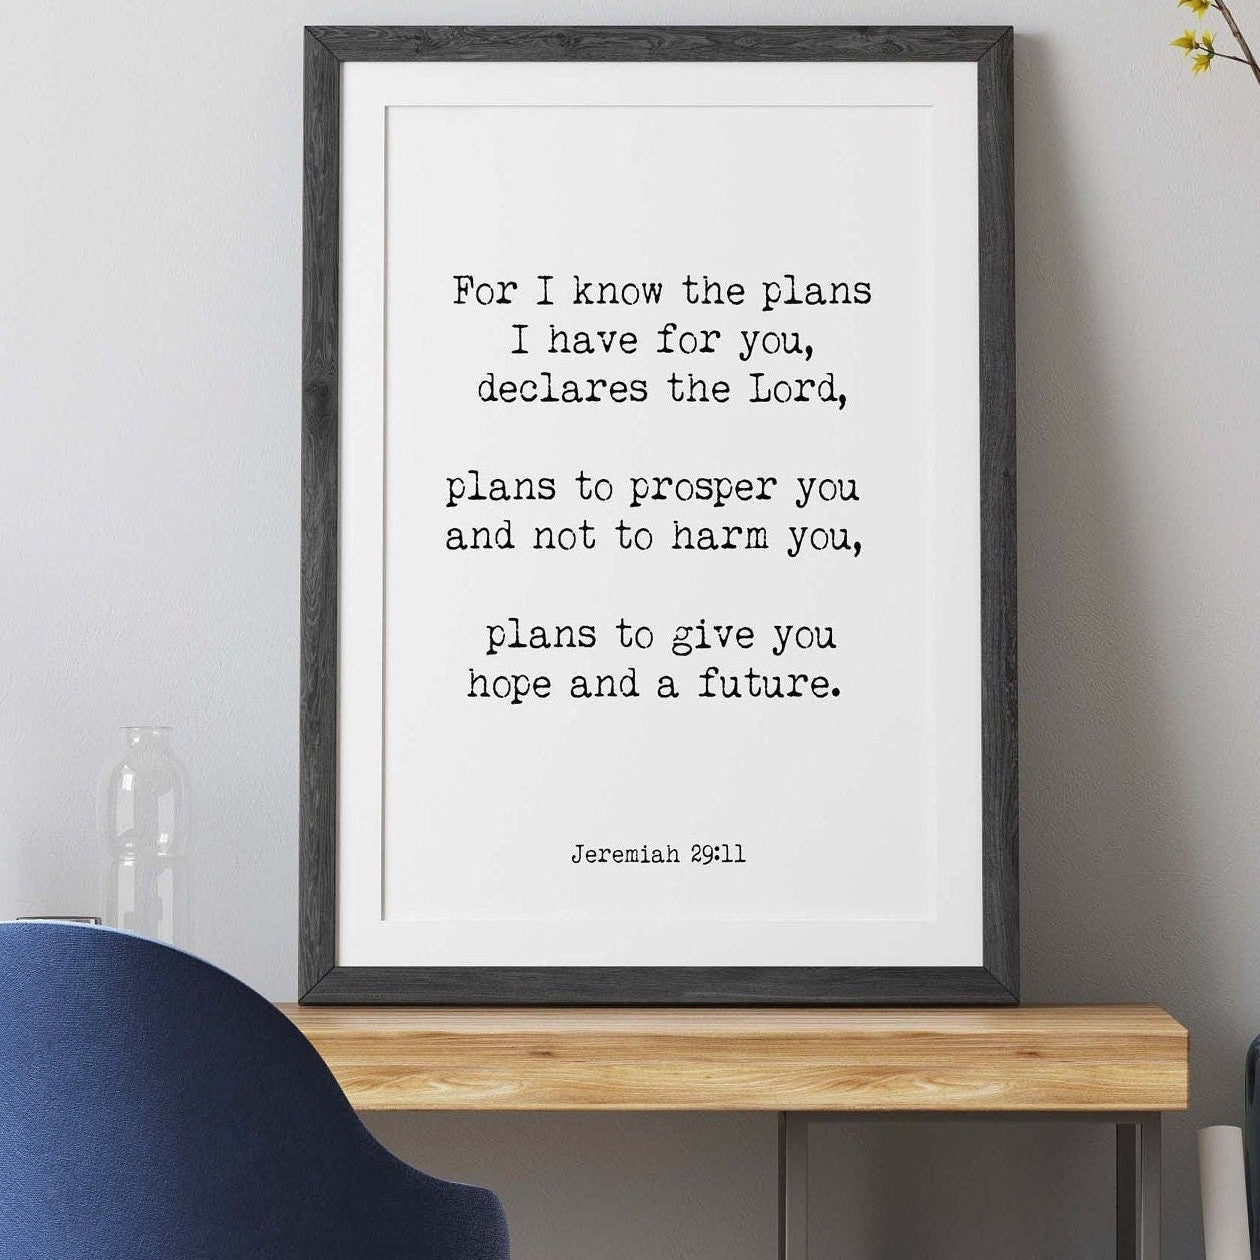 Give you Hope and a Future Jeremiah 29:11 Bible Verse Print, Inspirational Gift Wall Art in Black & White